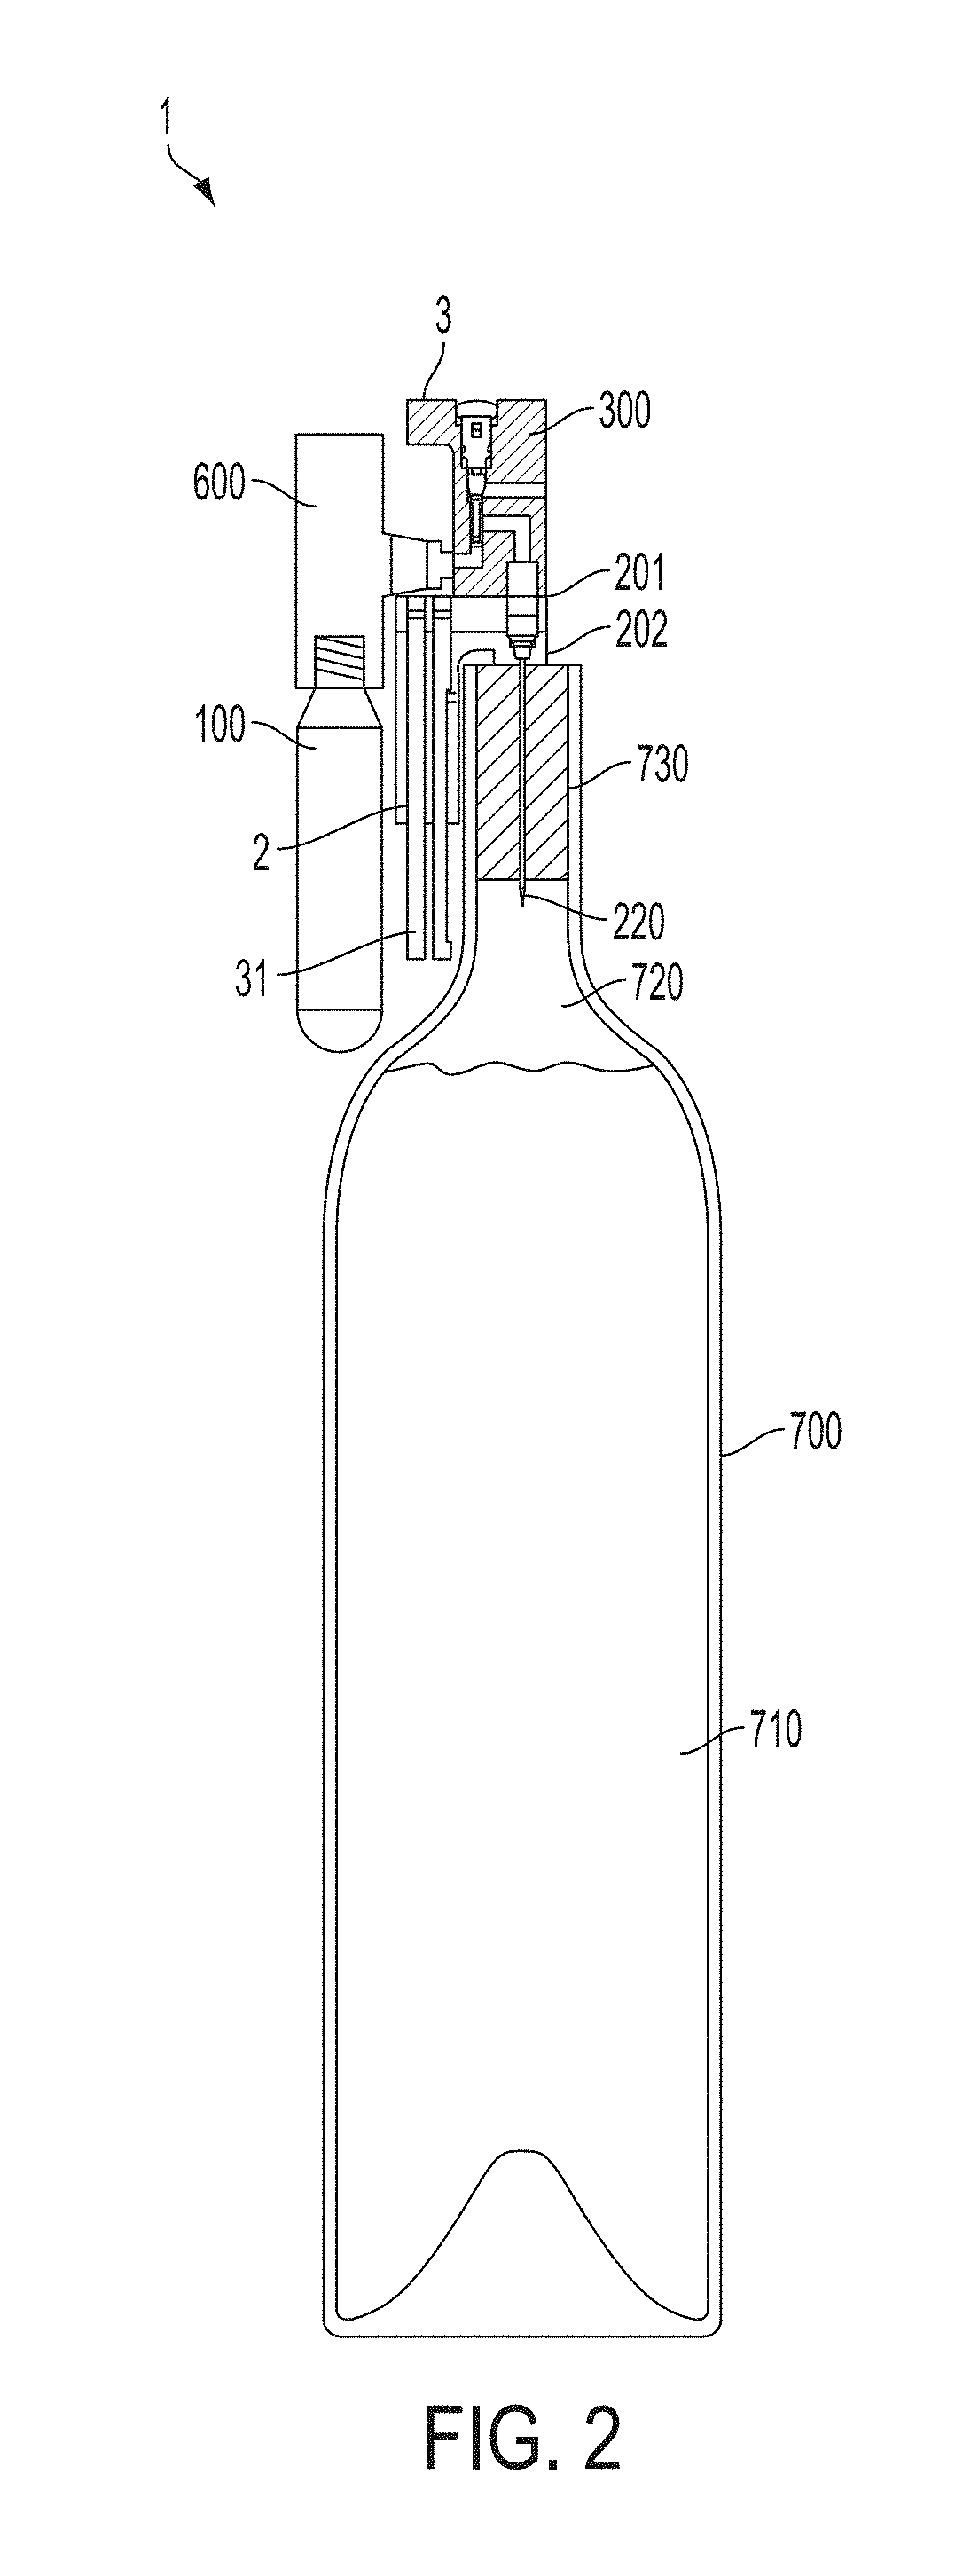 Needle for accessing a beverage in container